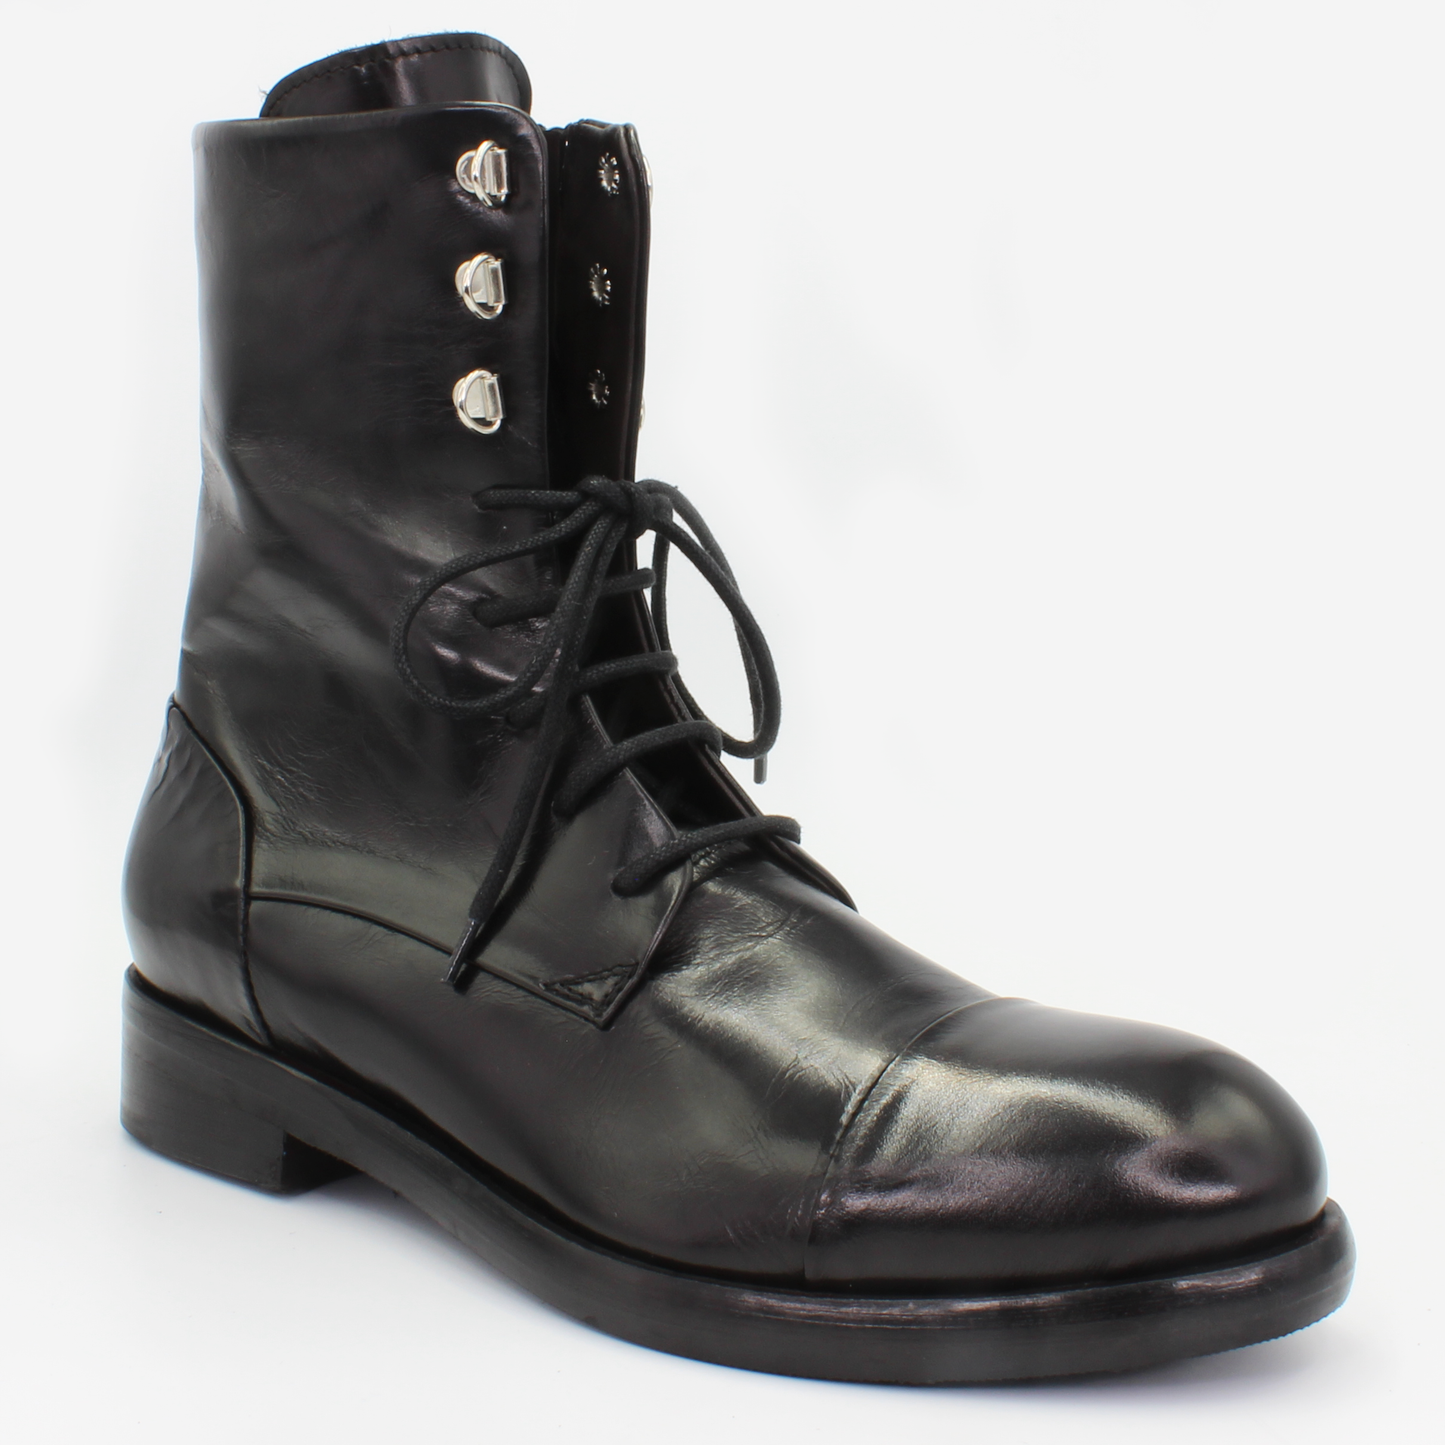 Shop Handmade Italian Leather Lace-up Ankle Boot in Nero Black (JP35773/1) or browse our range of hand-made Italian boots in leather or suede in-store at Aliverti Cape Town, or shop online. We deliver in South Africa & offer multiple payment plans as well as accept multiple safe & secure payment methods.